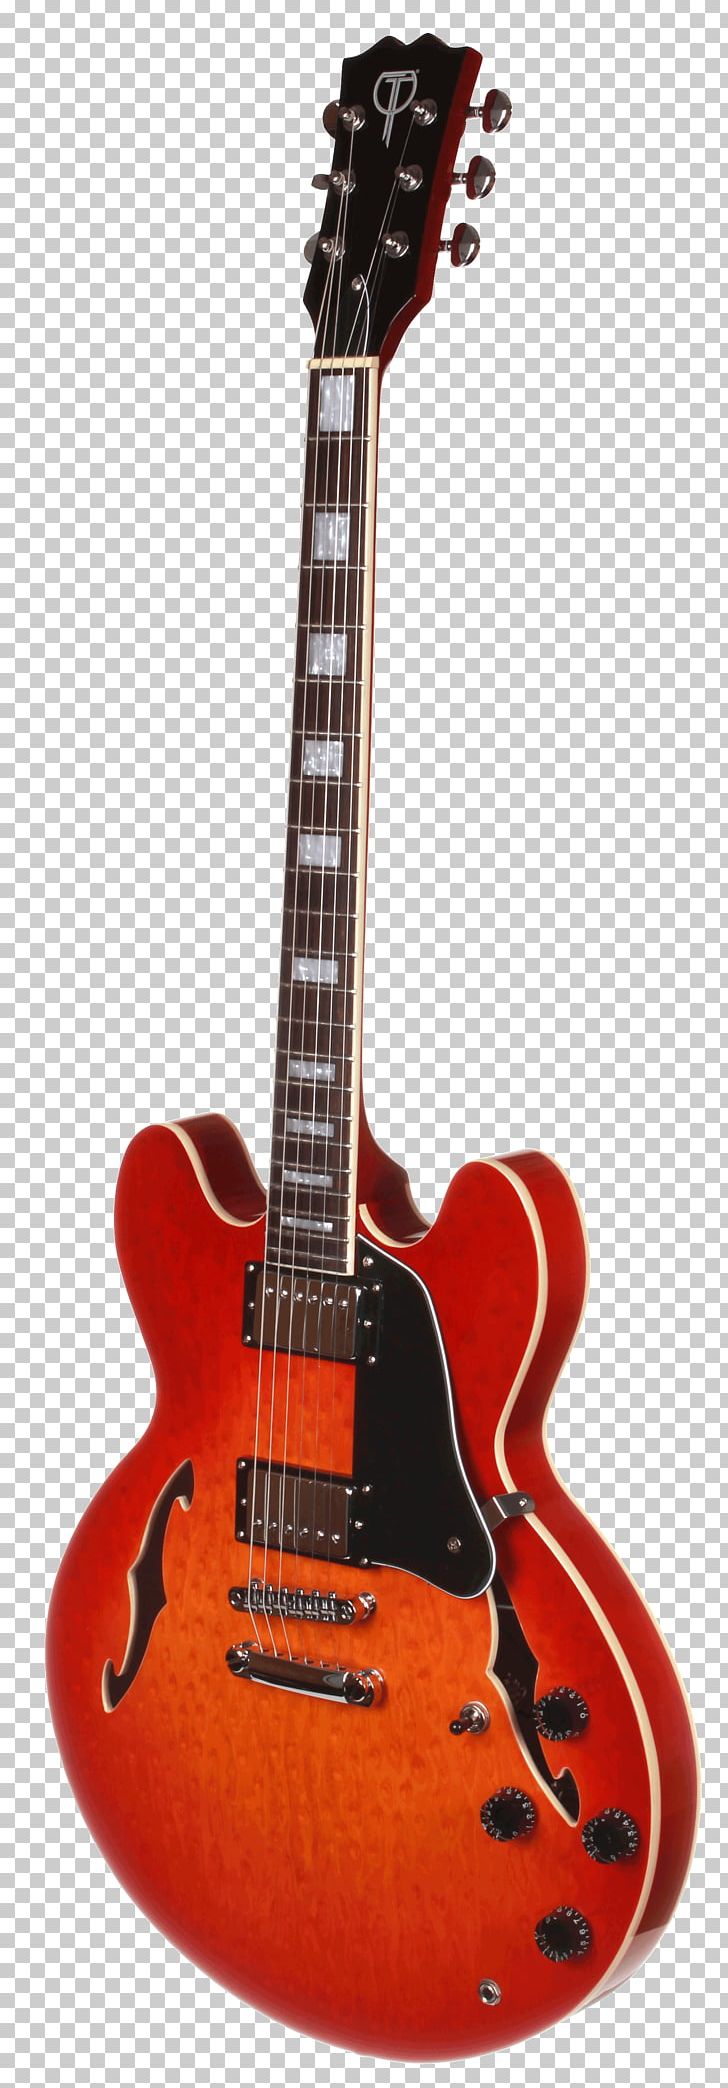 Electric Guitar Acoustic Guitar Yamaha SA2200 Yamaha Corporation PNG, Clipart, Acoustic Electric Guitar, Acoustic Guitar, Archtop Guitar, Guitar Accessory, Plucked String Instruments Free PNG Download